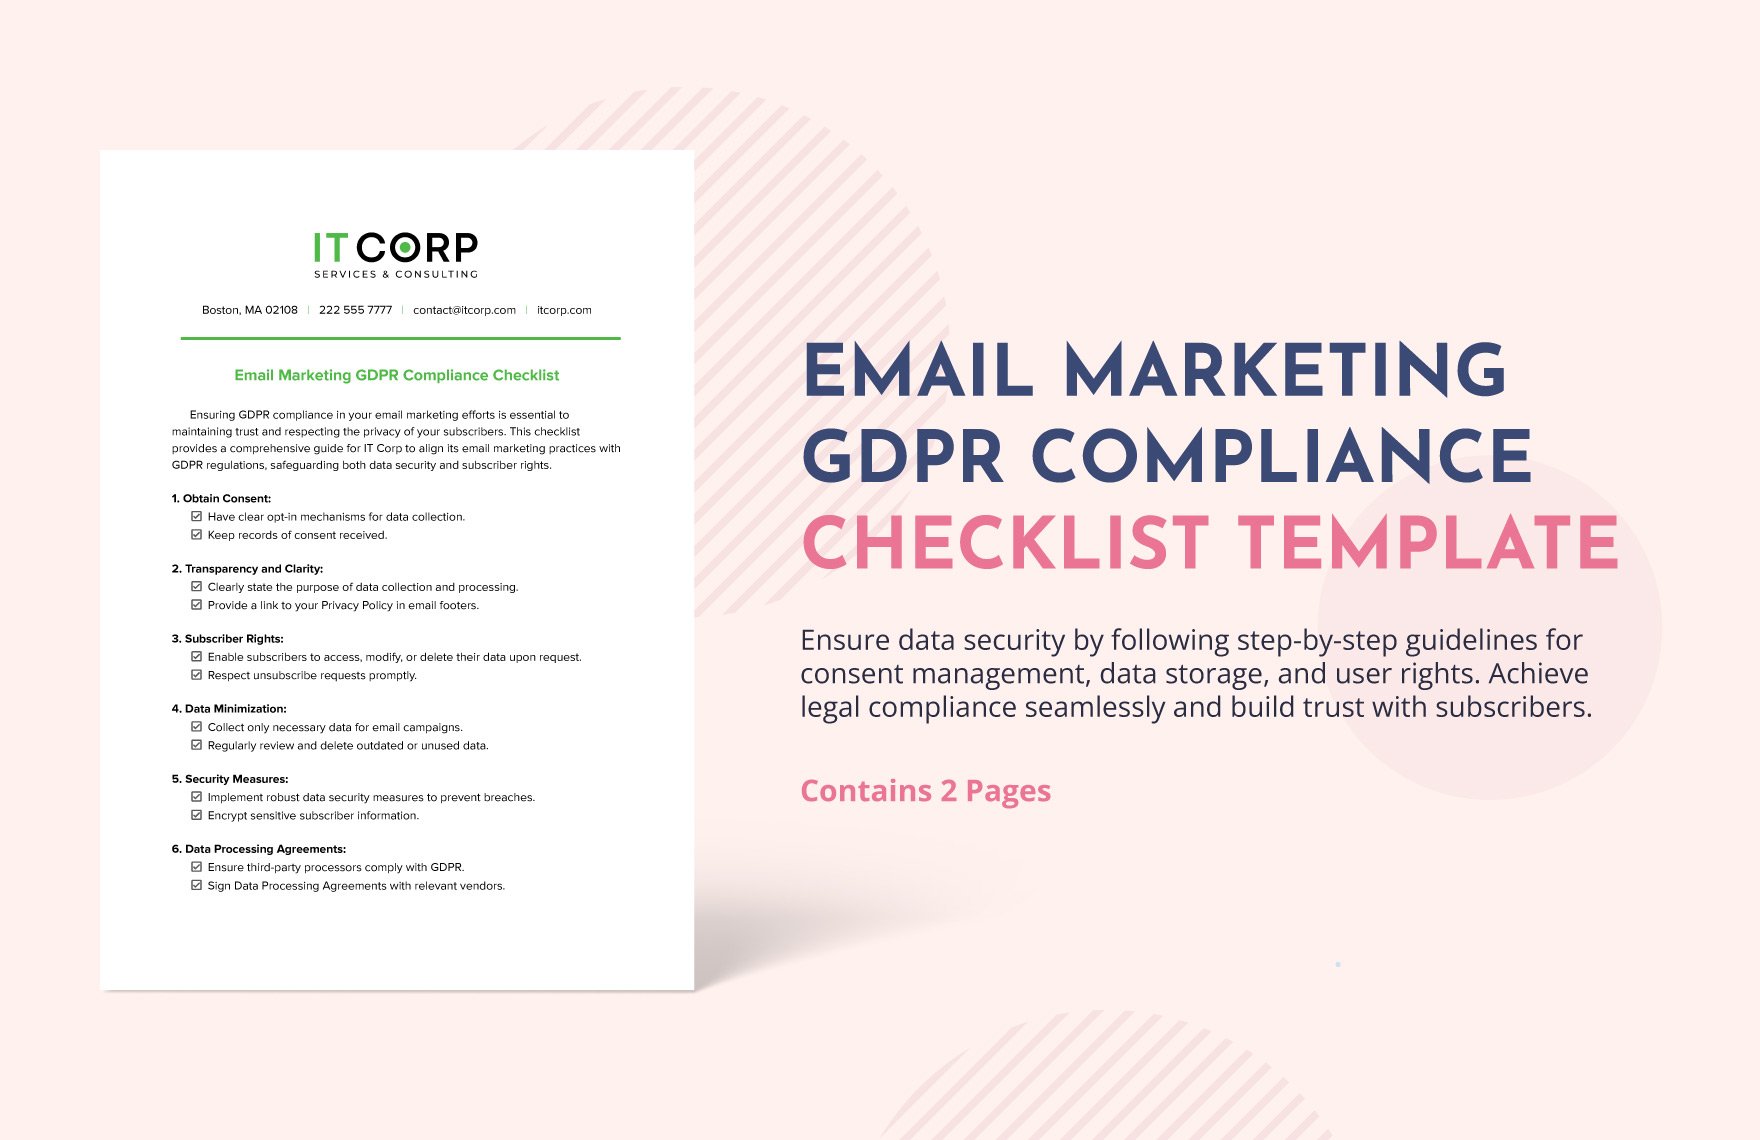 Email Marketing GDPR Compliance Checklist Template